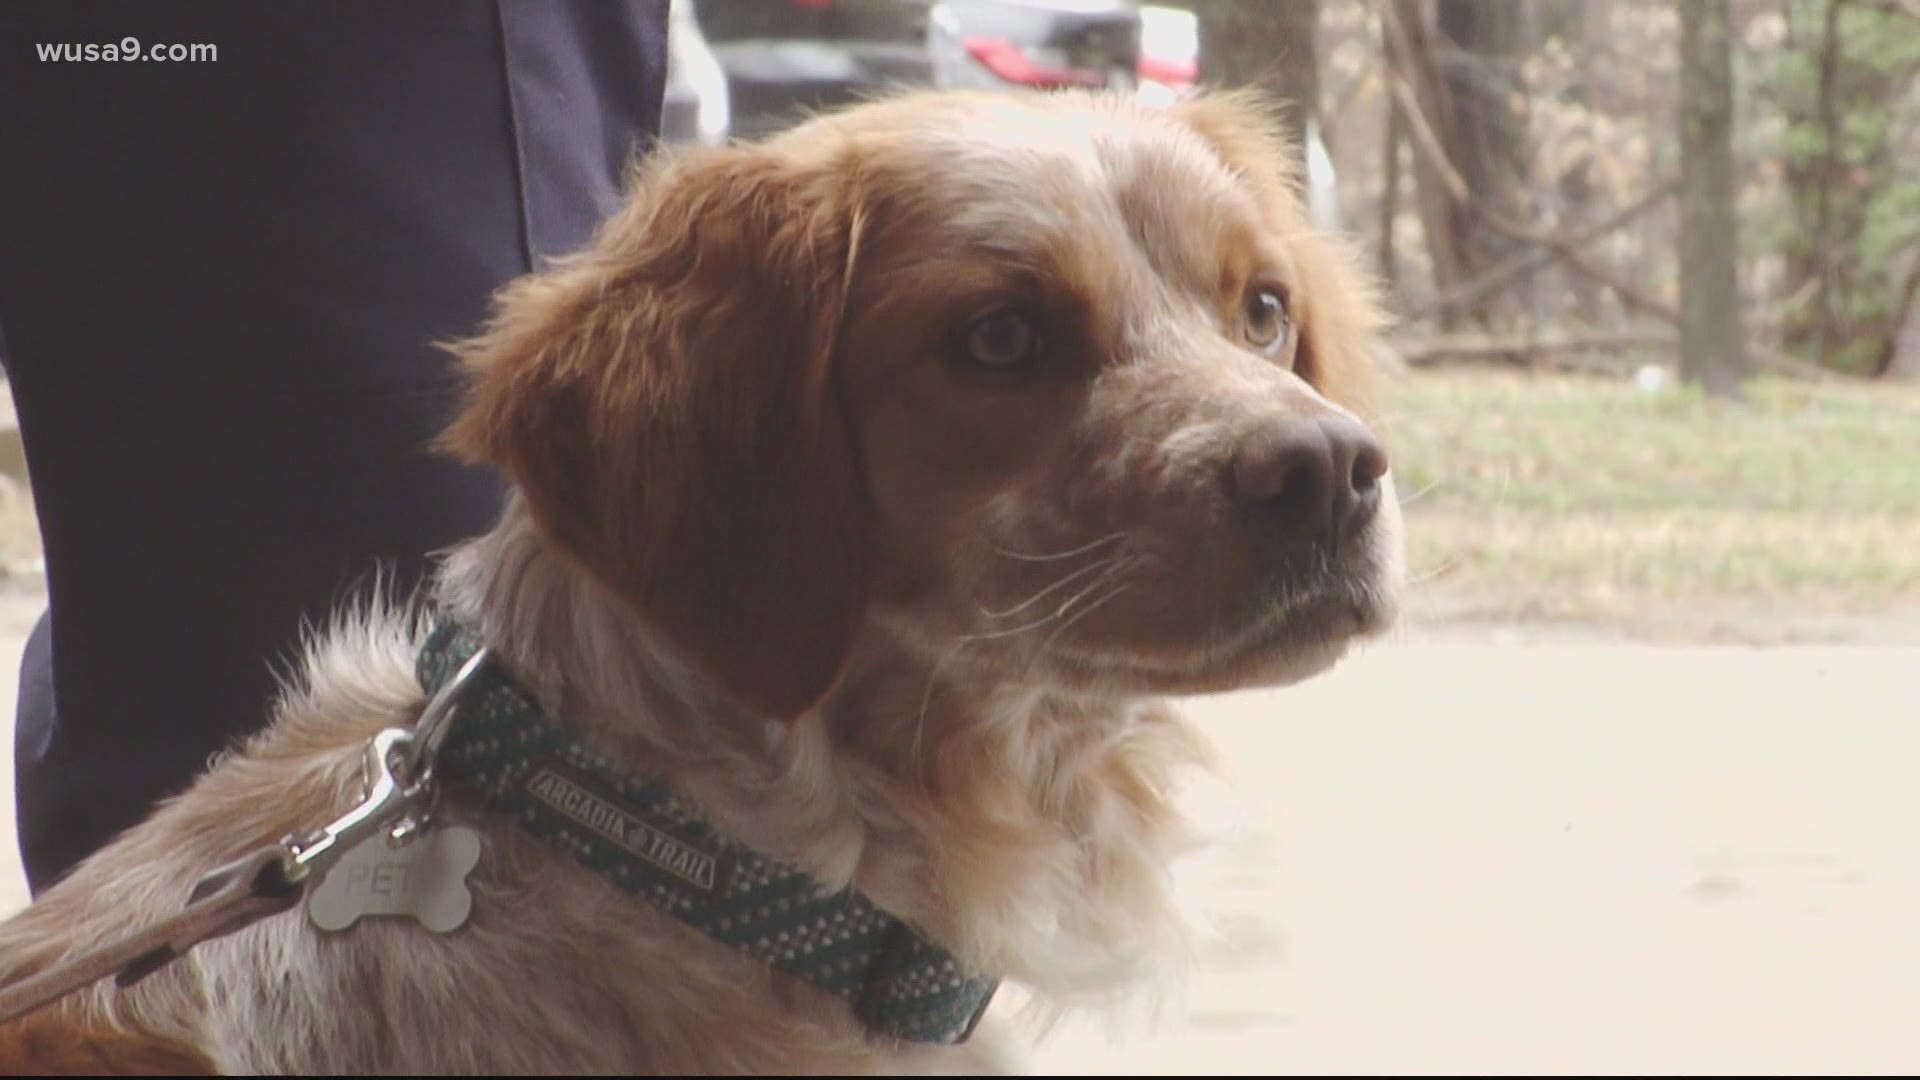 PGPD emotional support dog, Prince George's police dog Pete 